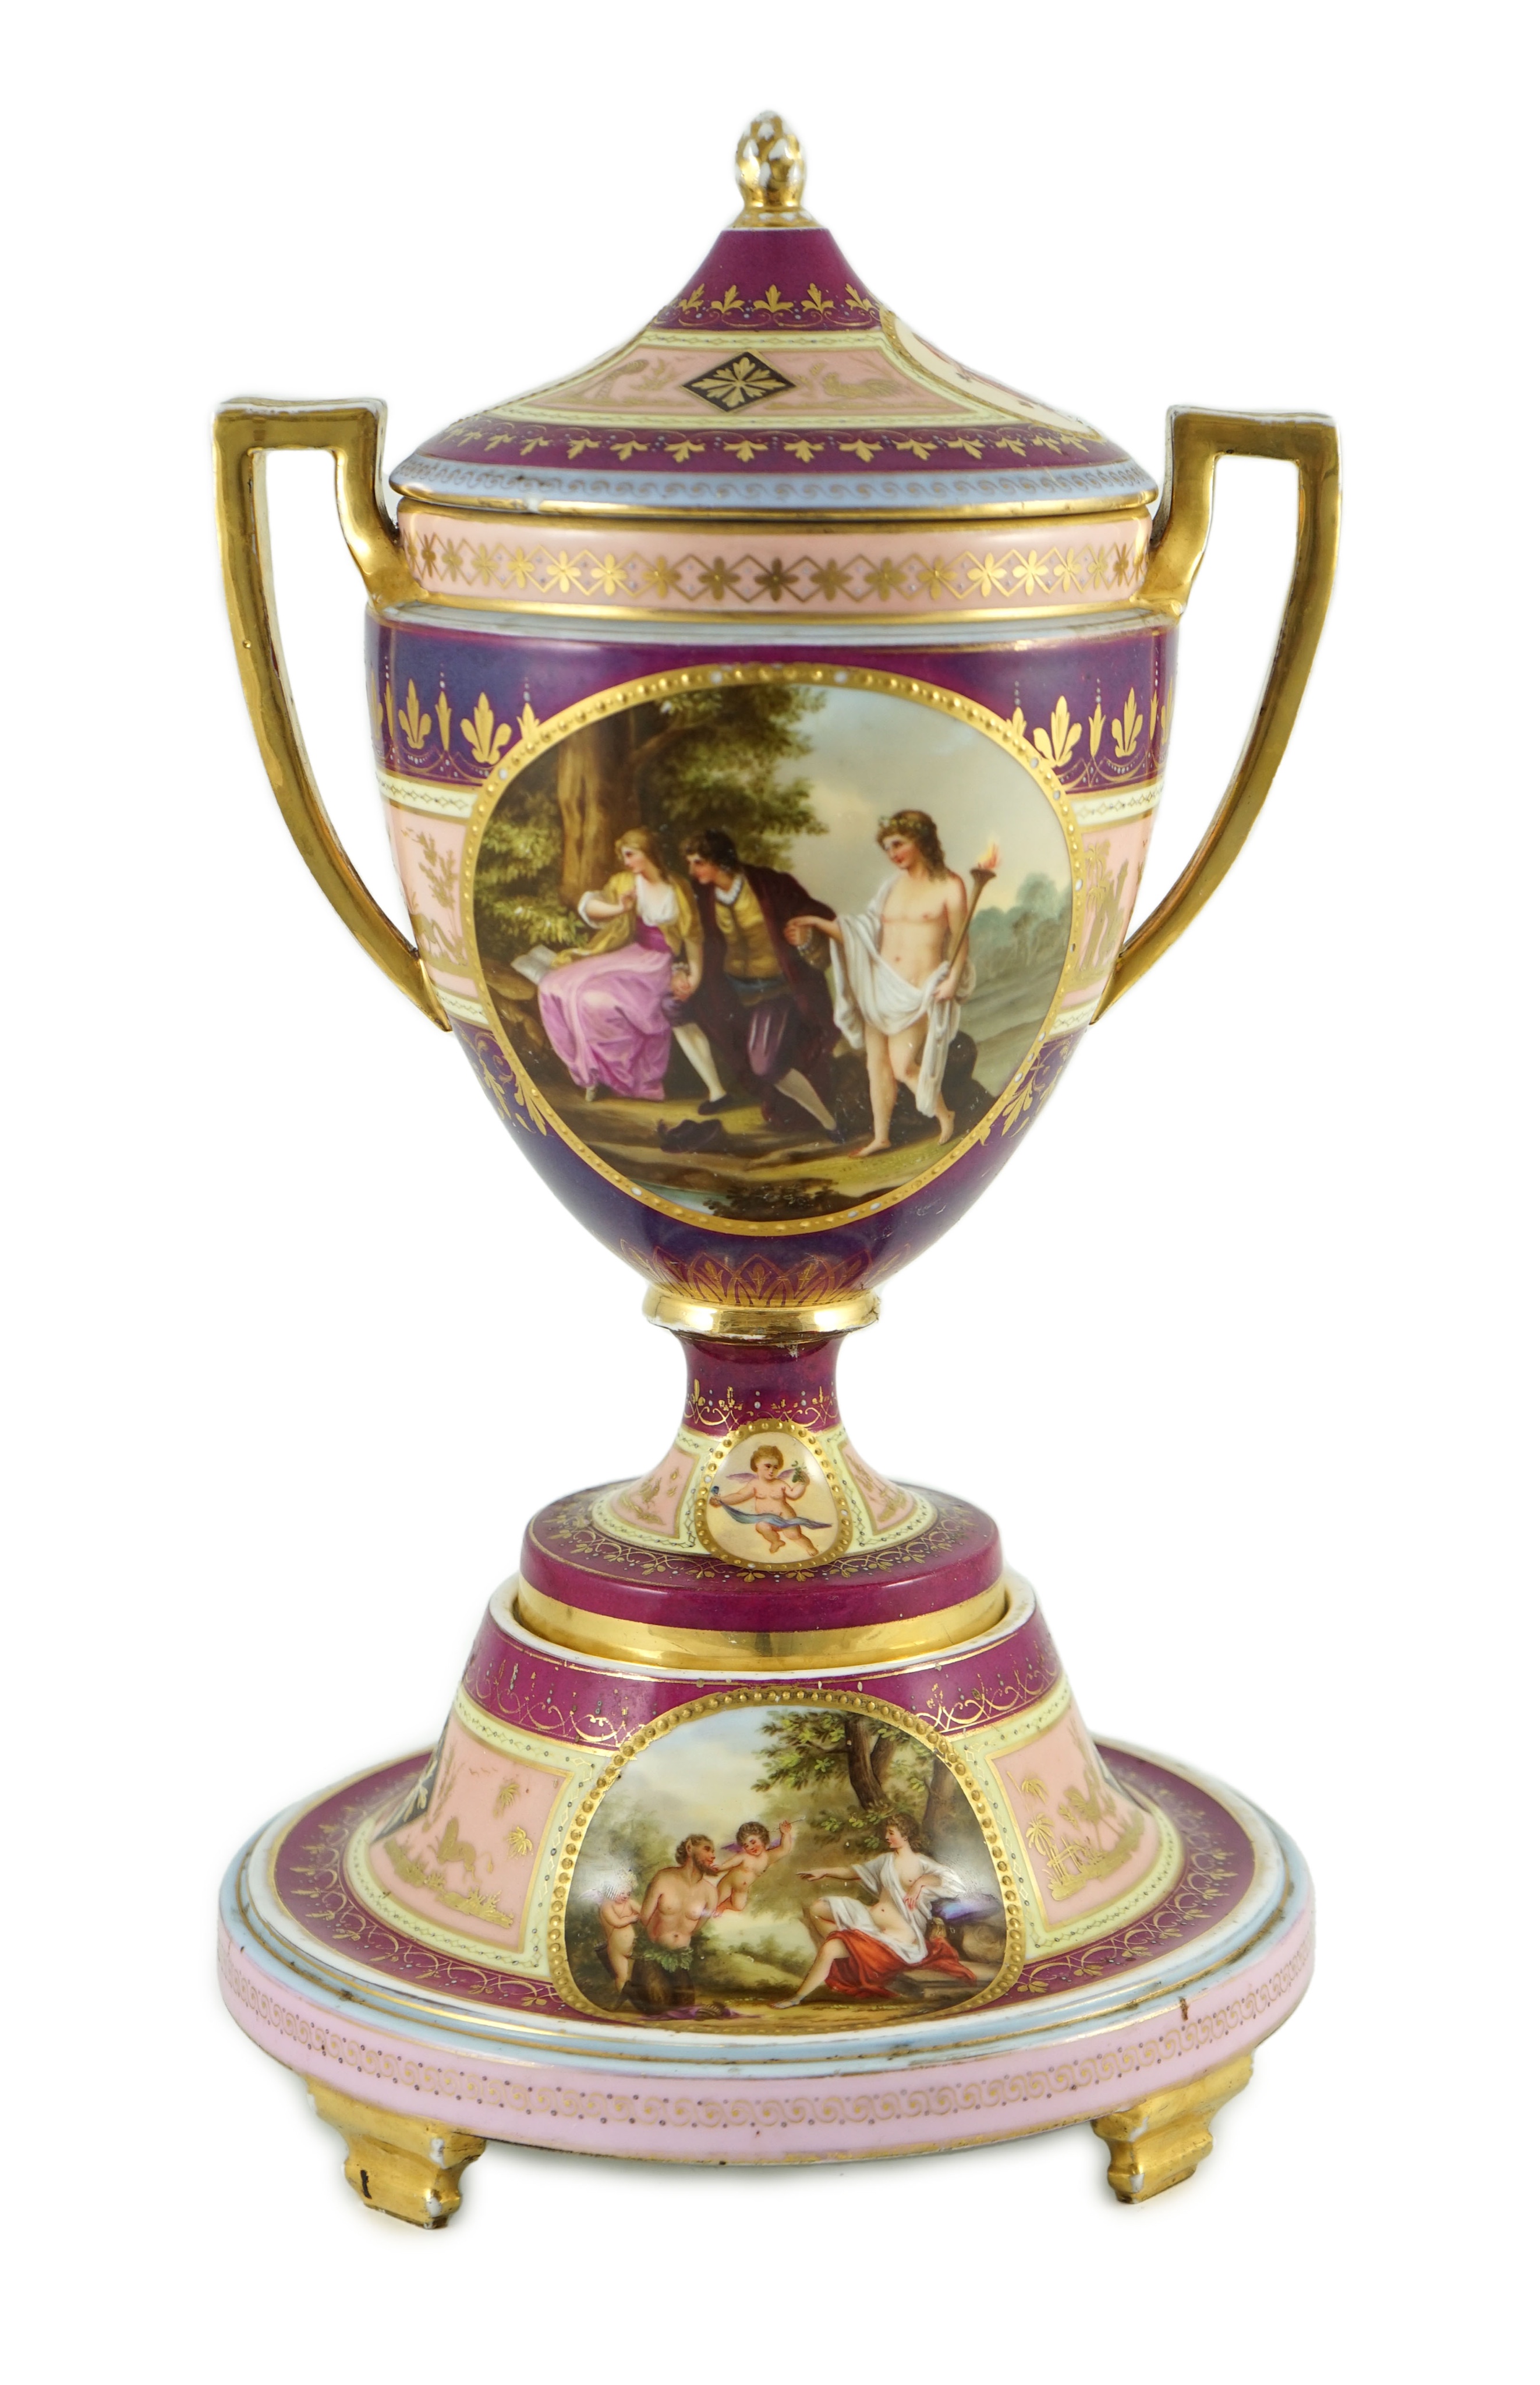 A Vienna style porcelain two handled cup, cover and stand, late 19th century, 42 cm high                                                                                                                                    